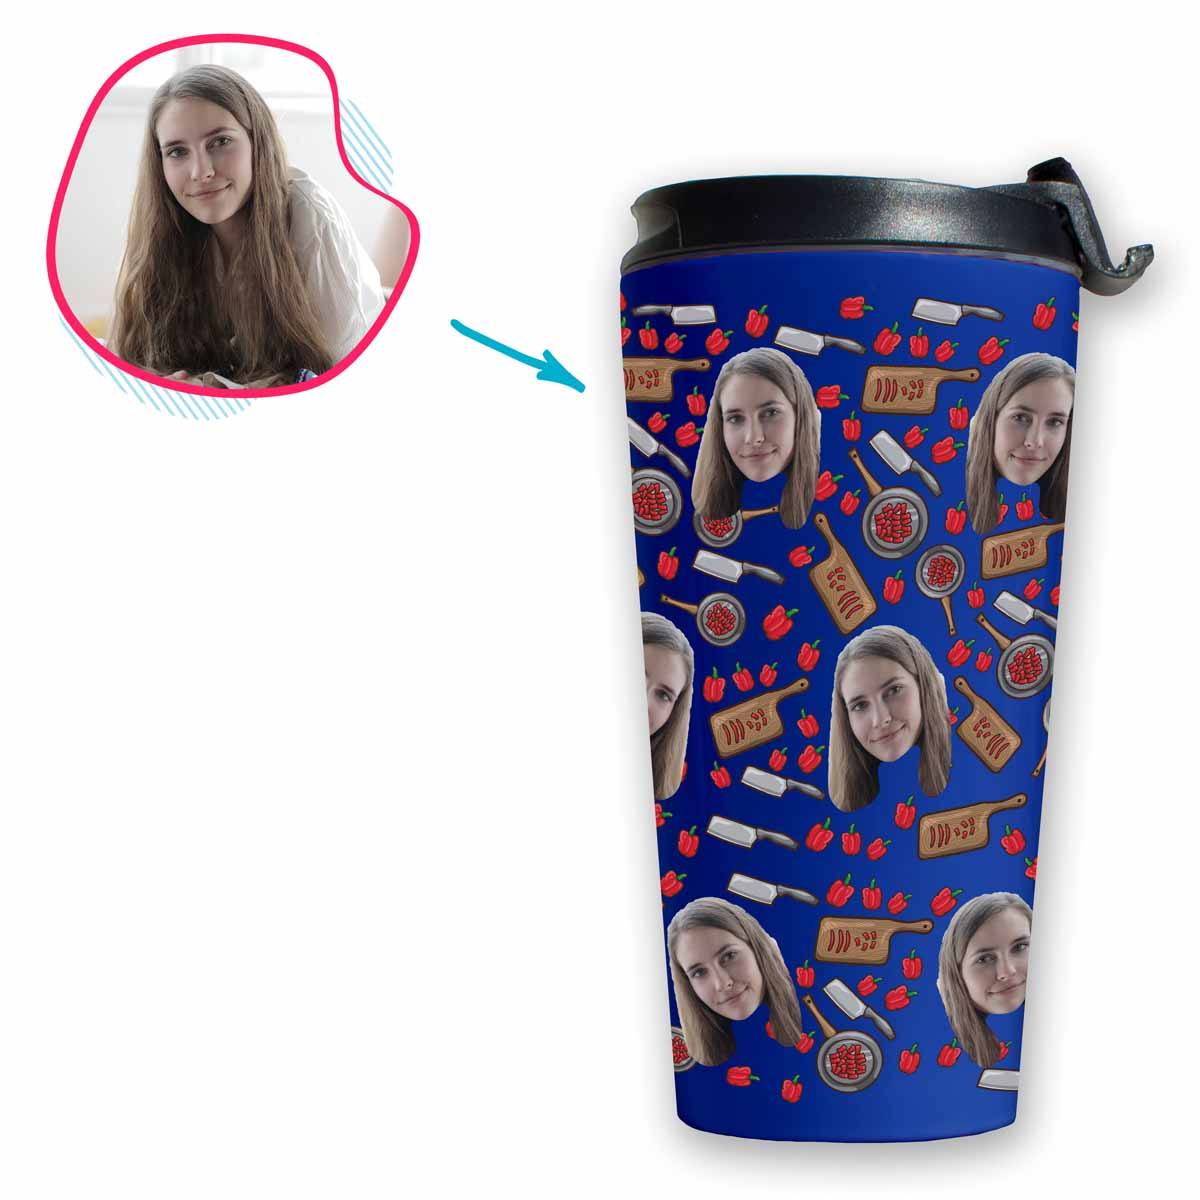 darkblue Сooking travel mug personalized with photo of face printed on it